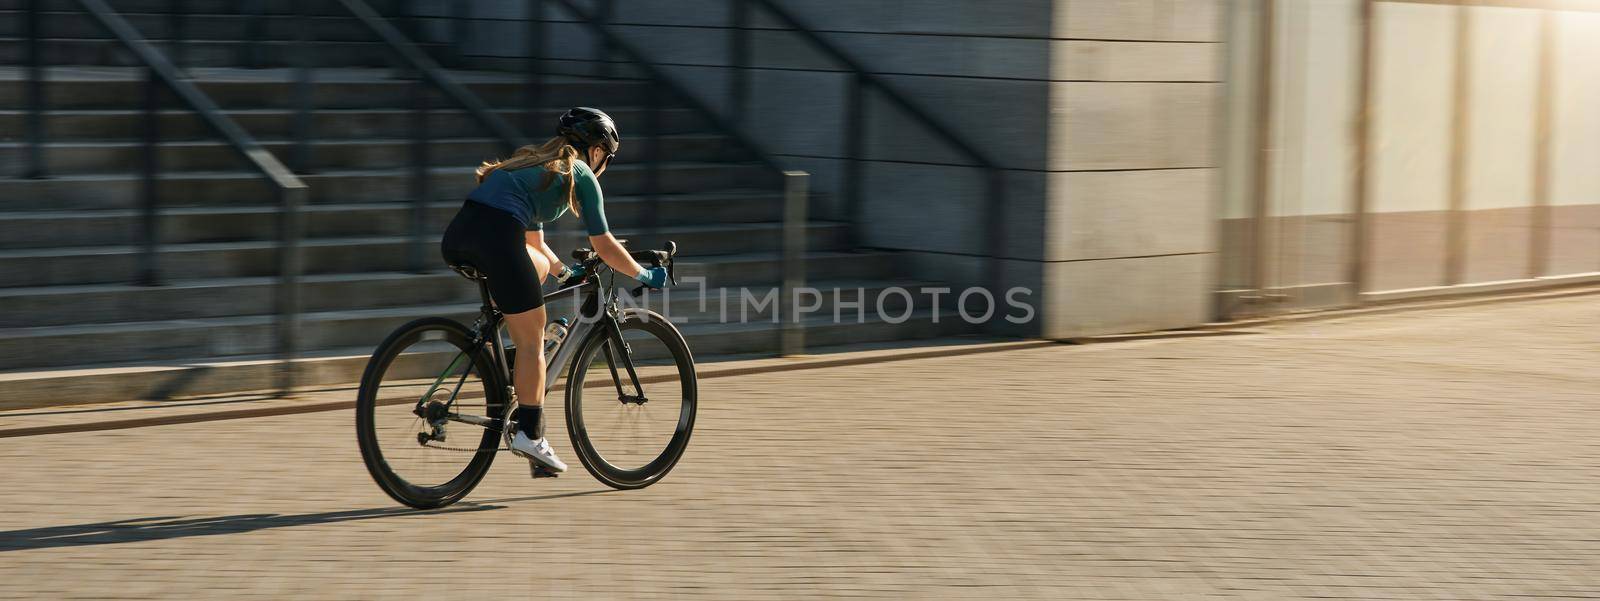 Professional female cyclist in cycling garment and protective gear riding bicycle in city, rushing and passing buildings while training outdoors on a daytime by friendsstock